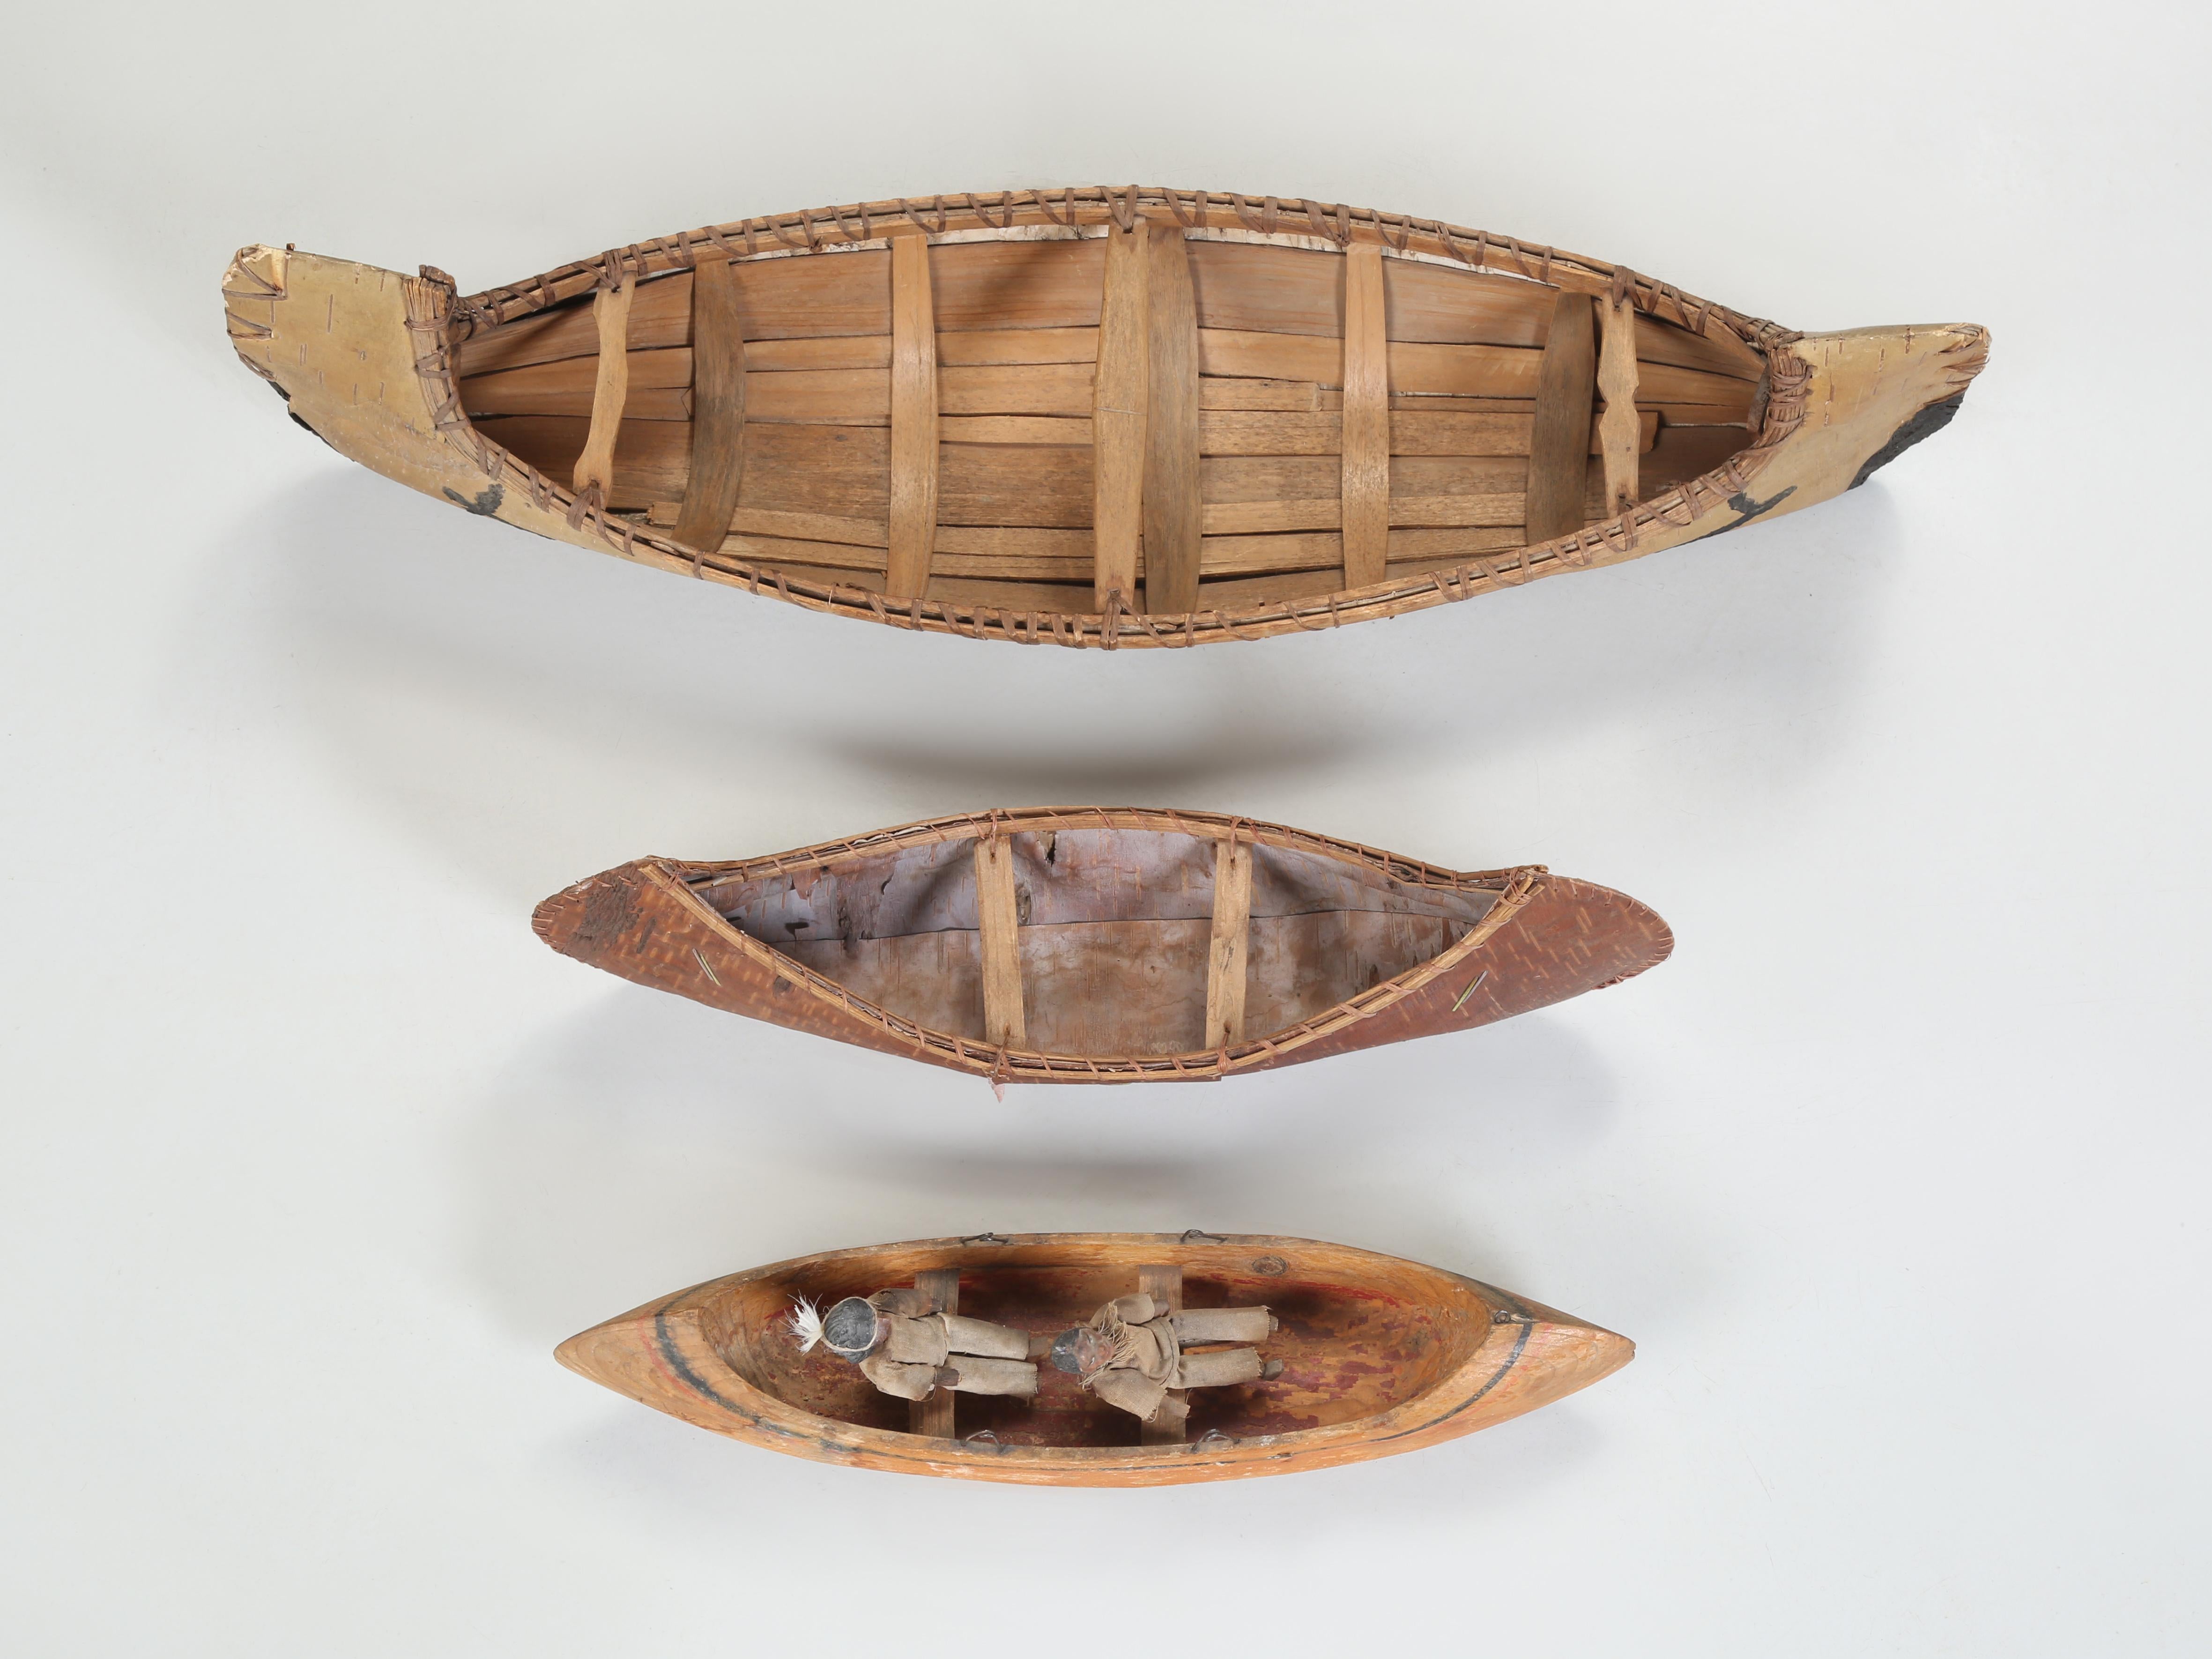 Collection of (3) Native American Folk Art Children's Toy Canoes most likely made between the 1940's and 1950's. Two of the Folk Art Children's Canoes were made from Birchbark, while the smaller third Canoe was carved from a piece of wood and has